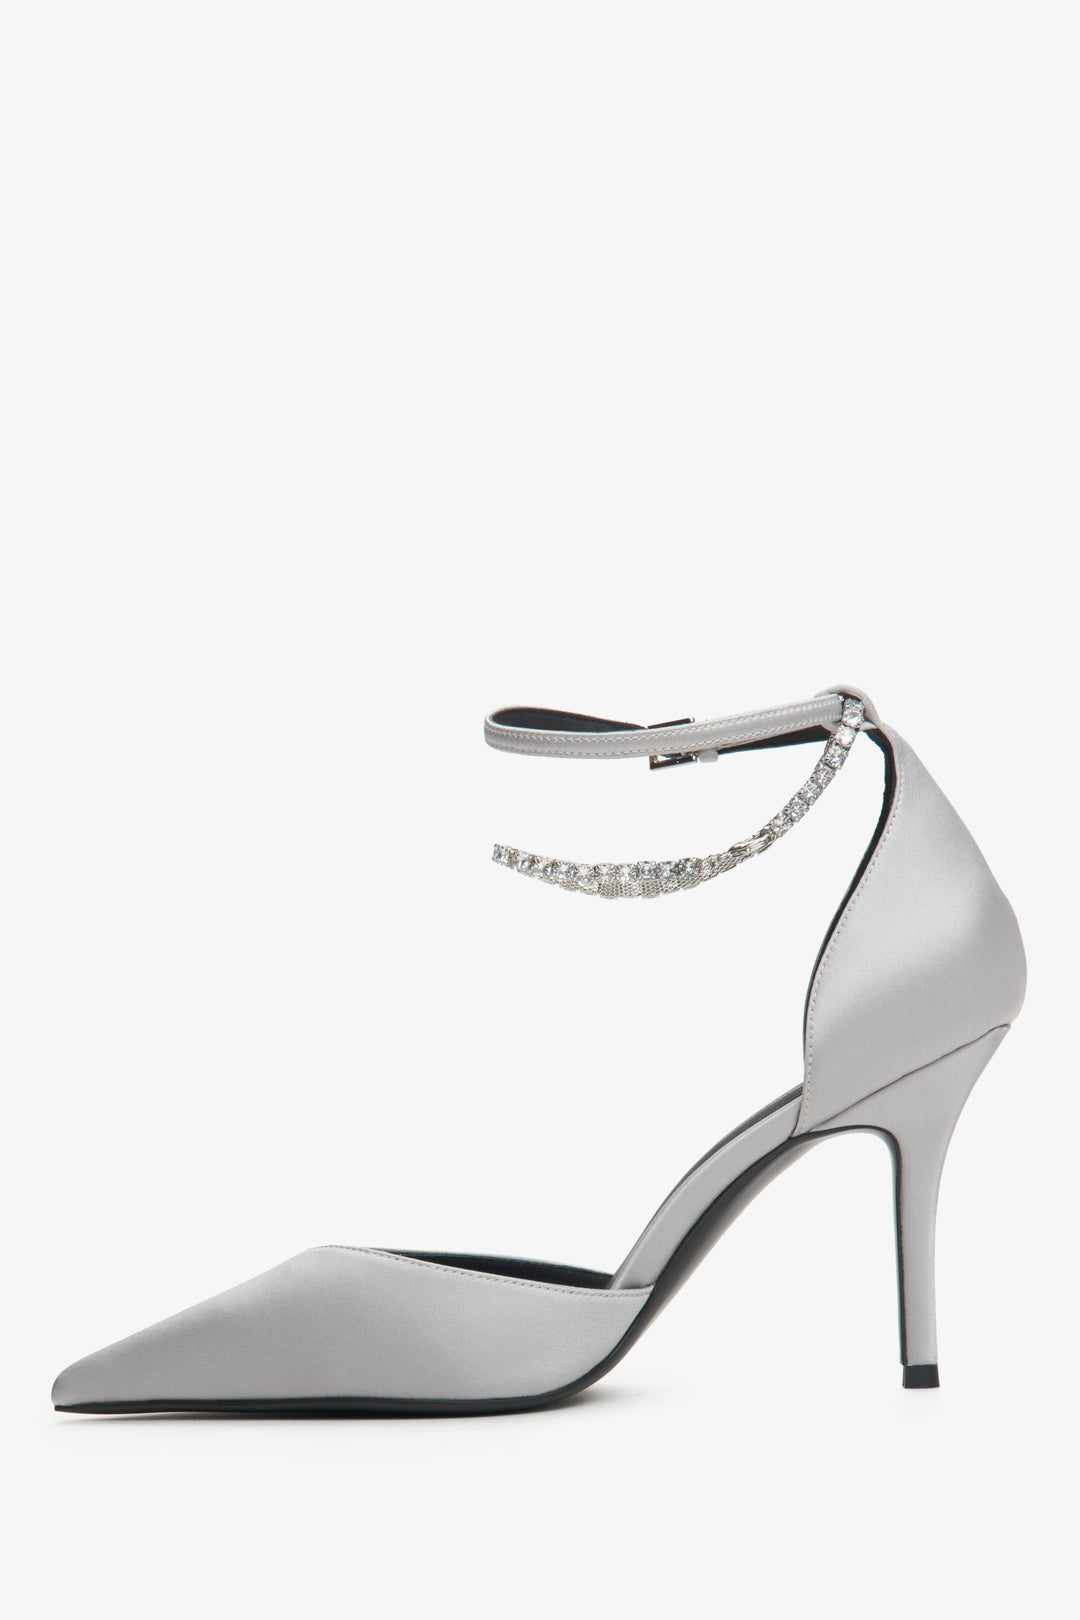 Women's grey pointed toe pumps with crystals by Estro x MustHave.